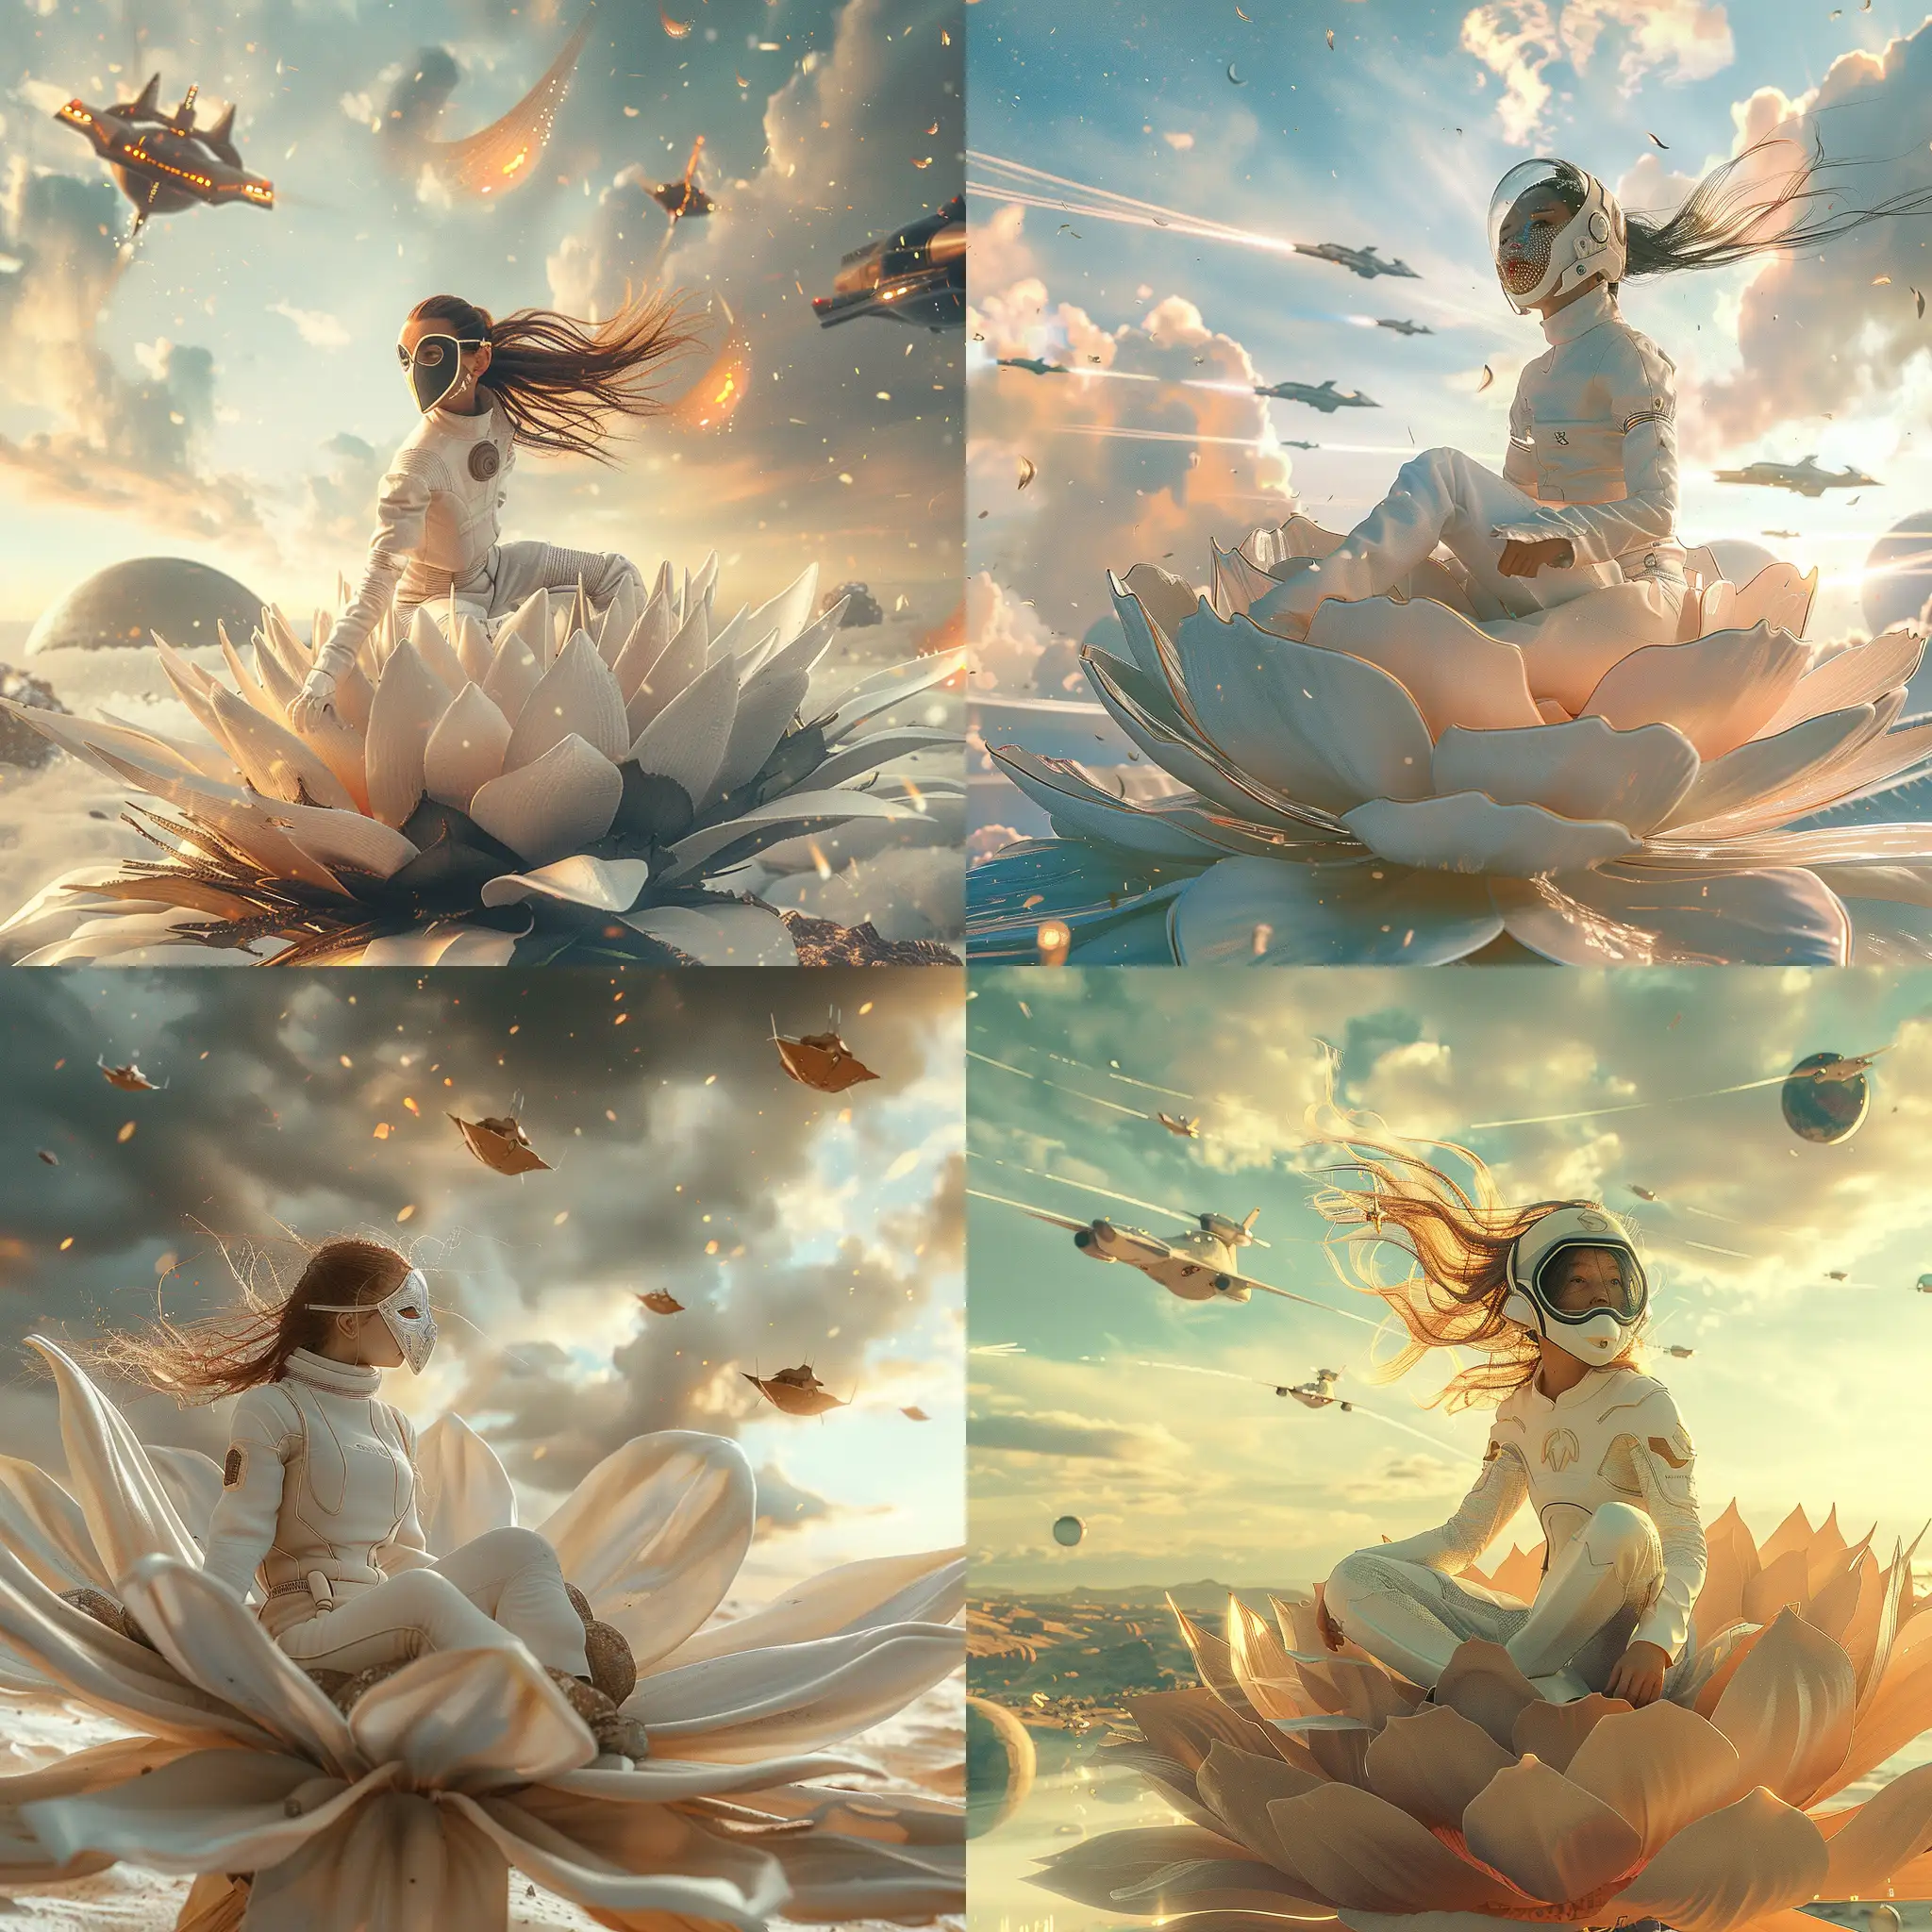 Magical-Girl-in-Spacesuit-on-Flower-with-Spaceships-Fantasy-Duneinspired-Art